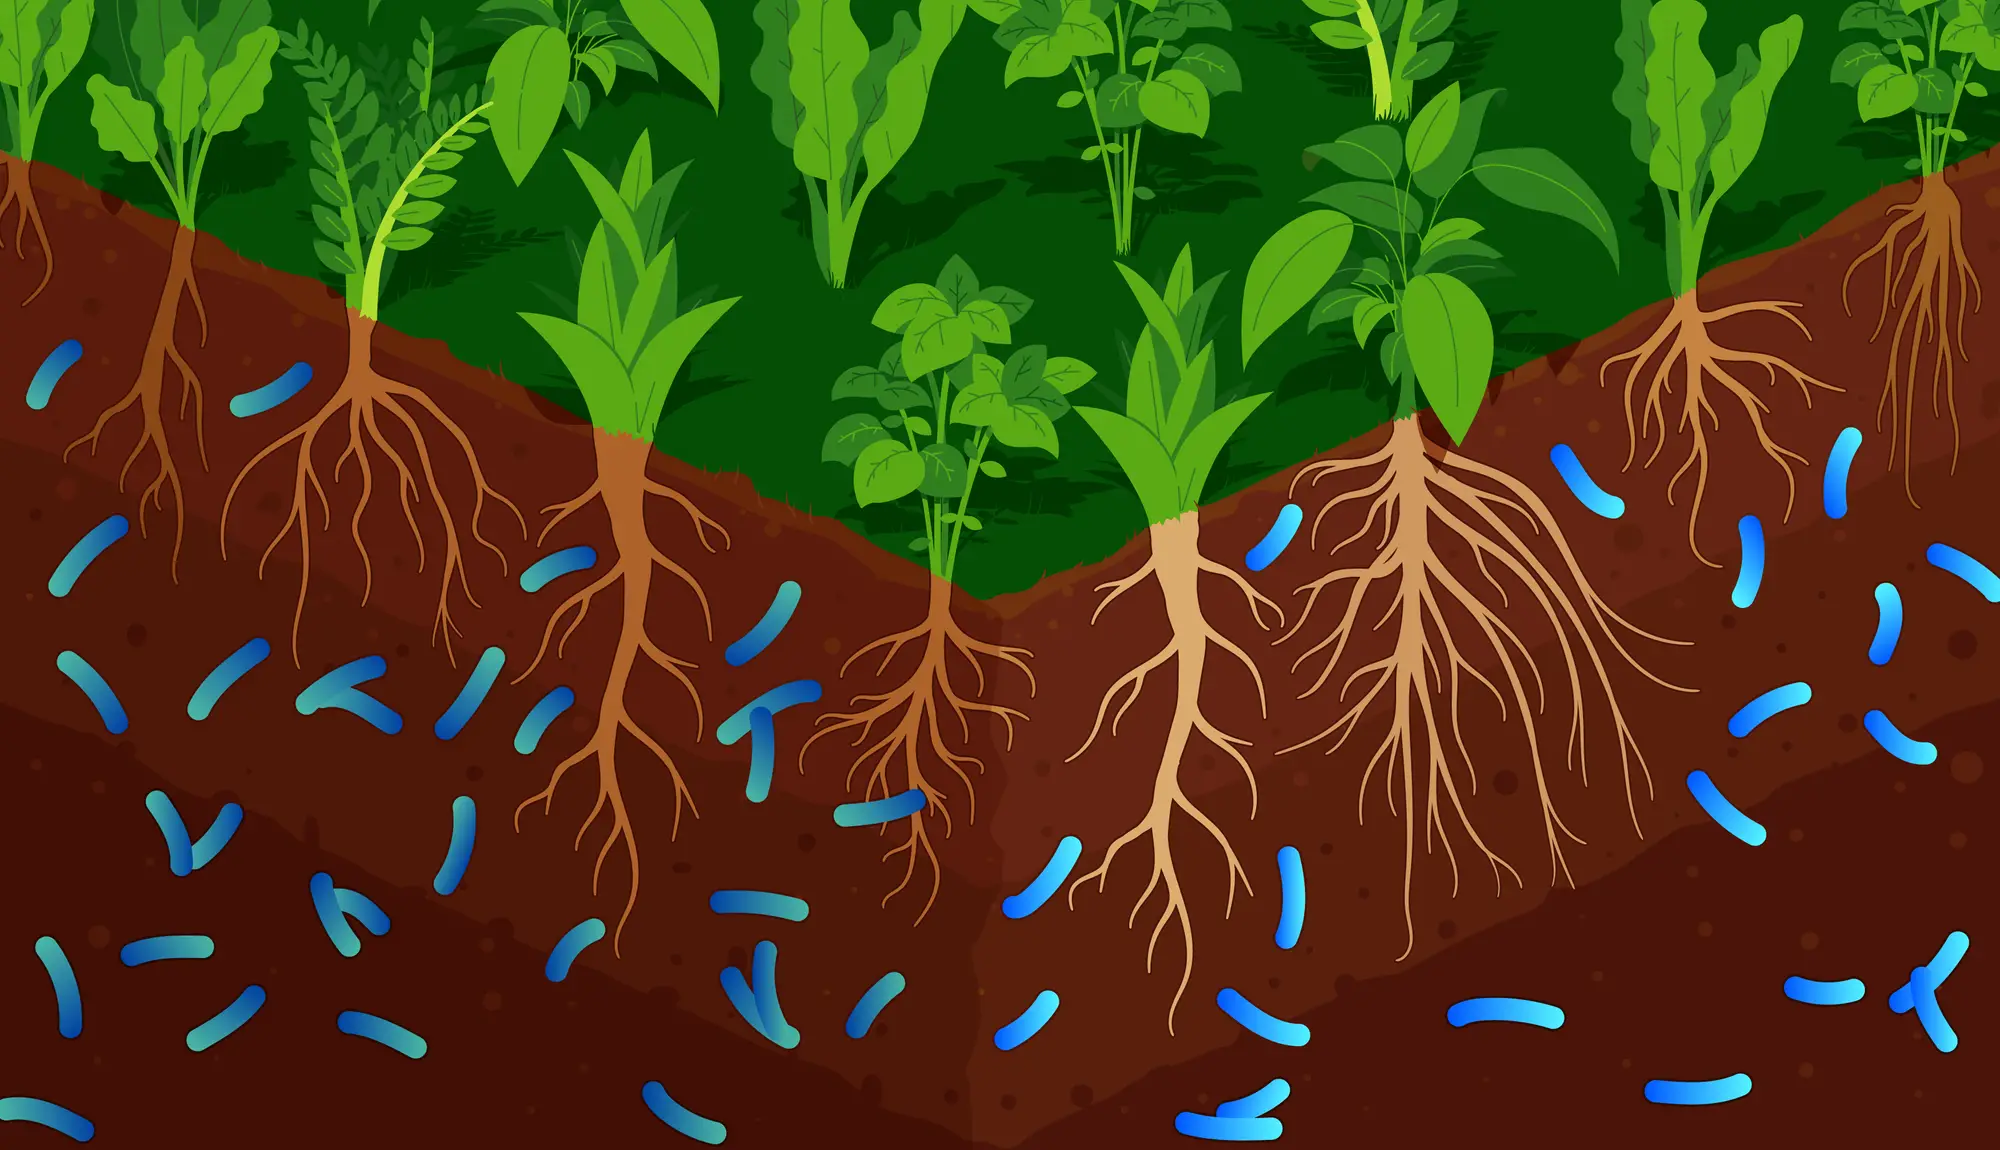 Guide To Soil Based Probiotics Uses, Benefits And Side Effects